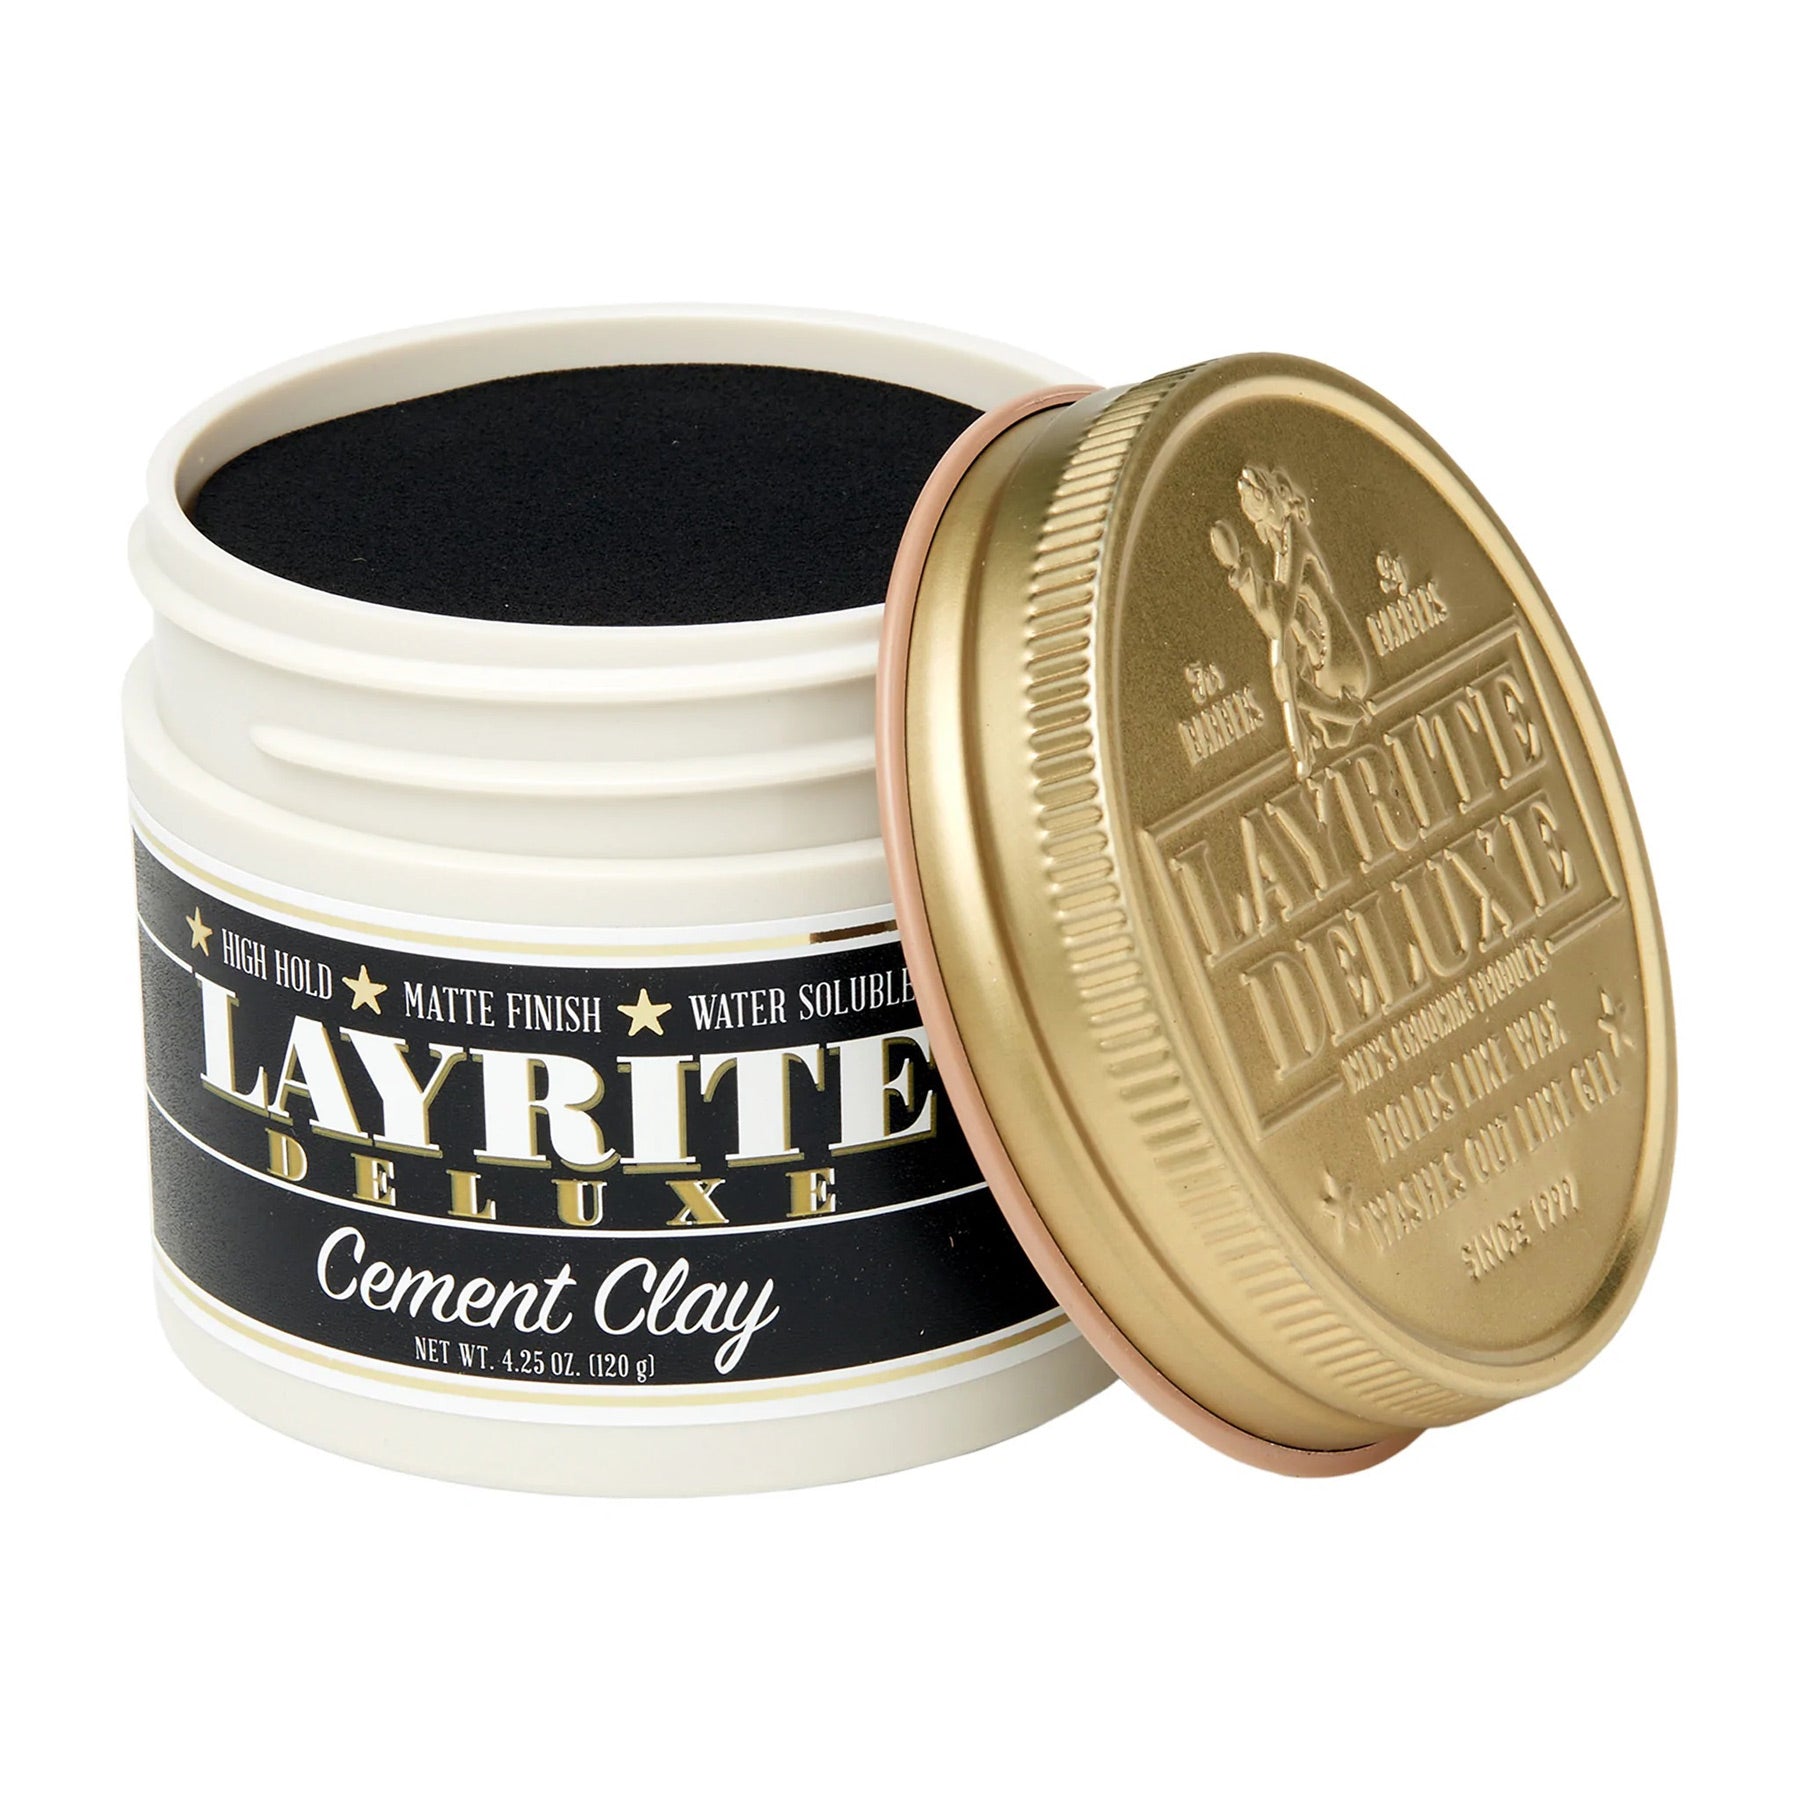 Layrite cement opened